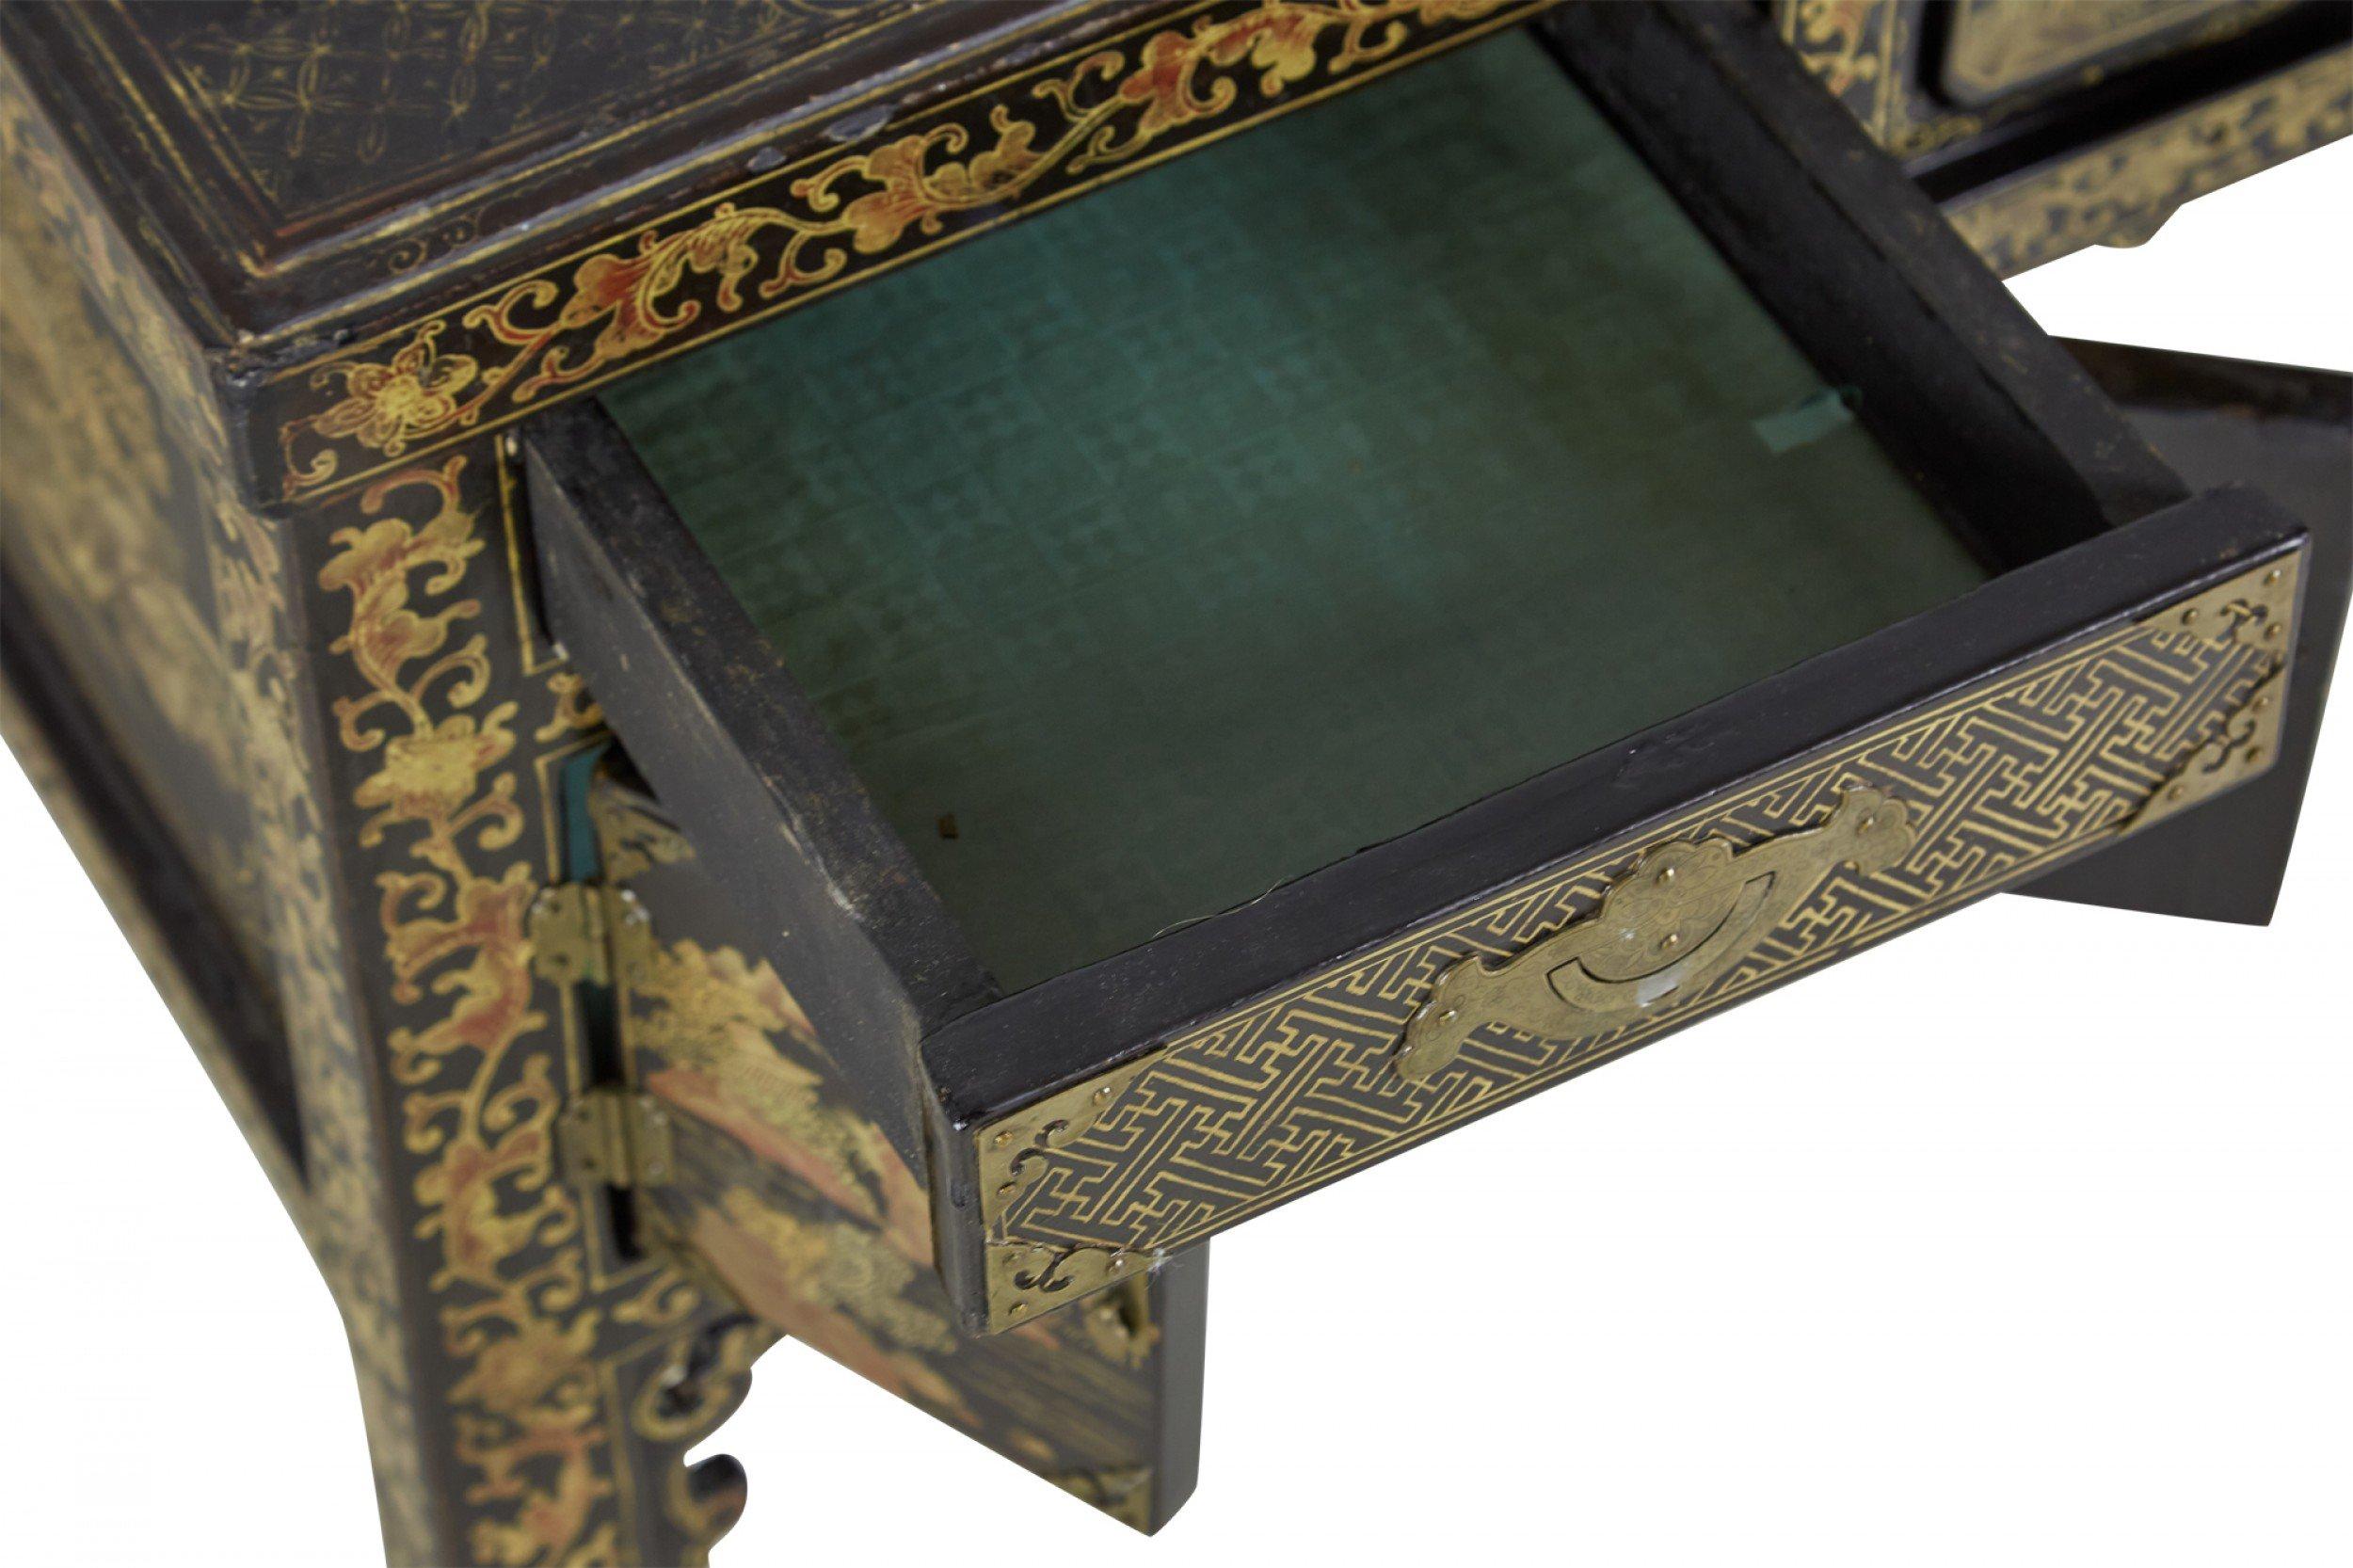 19th Century English Regency Chinese Export Gilt Black Lacquer Desk For Sale 6